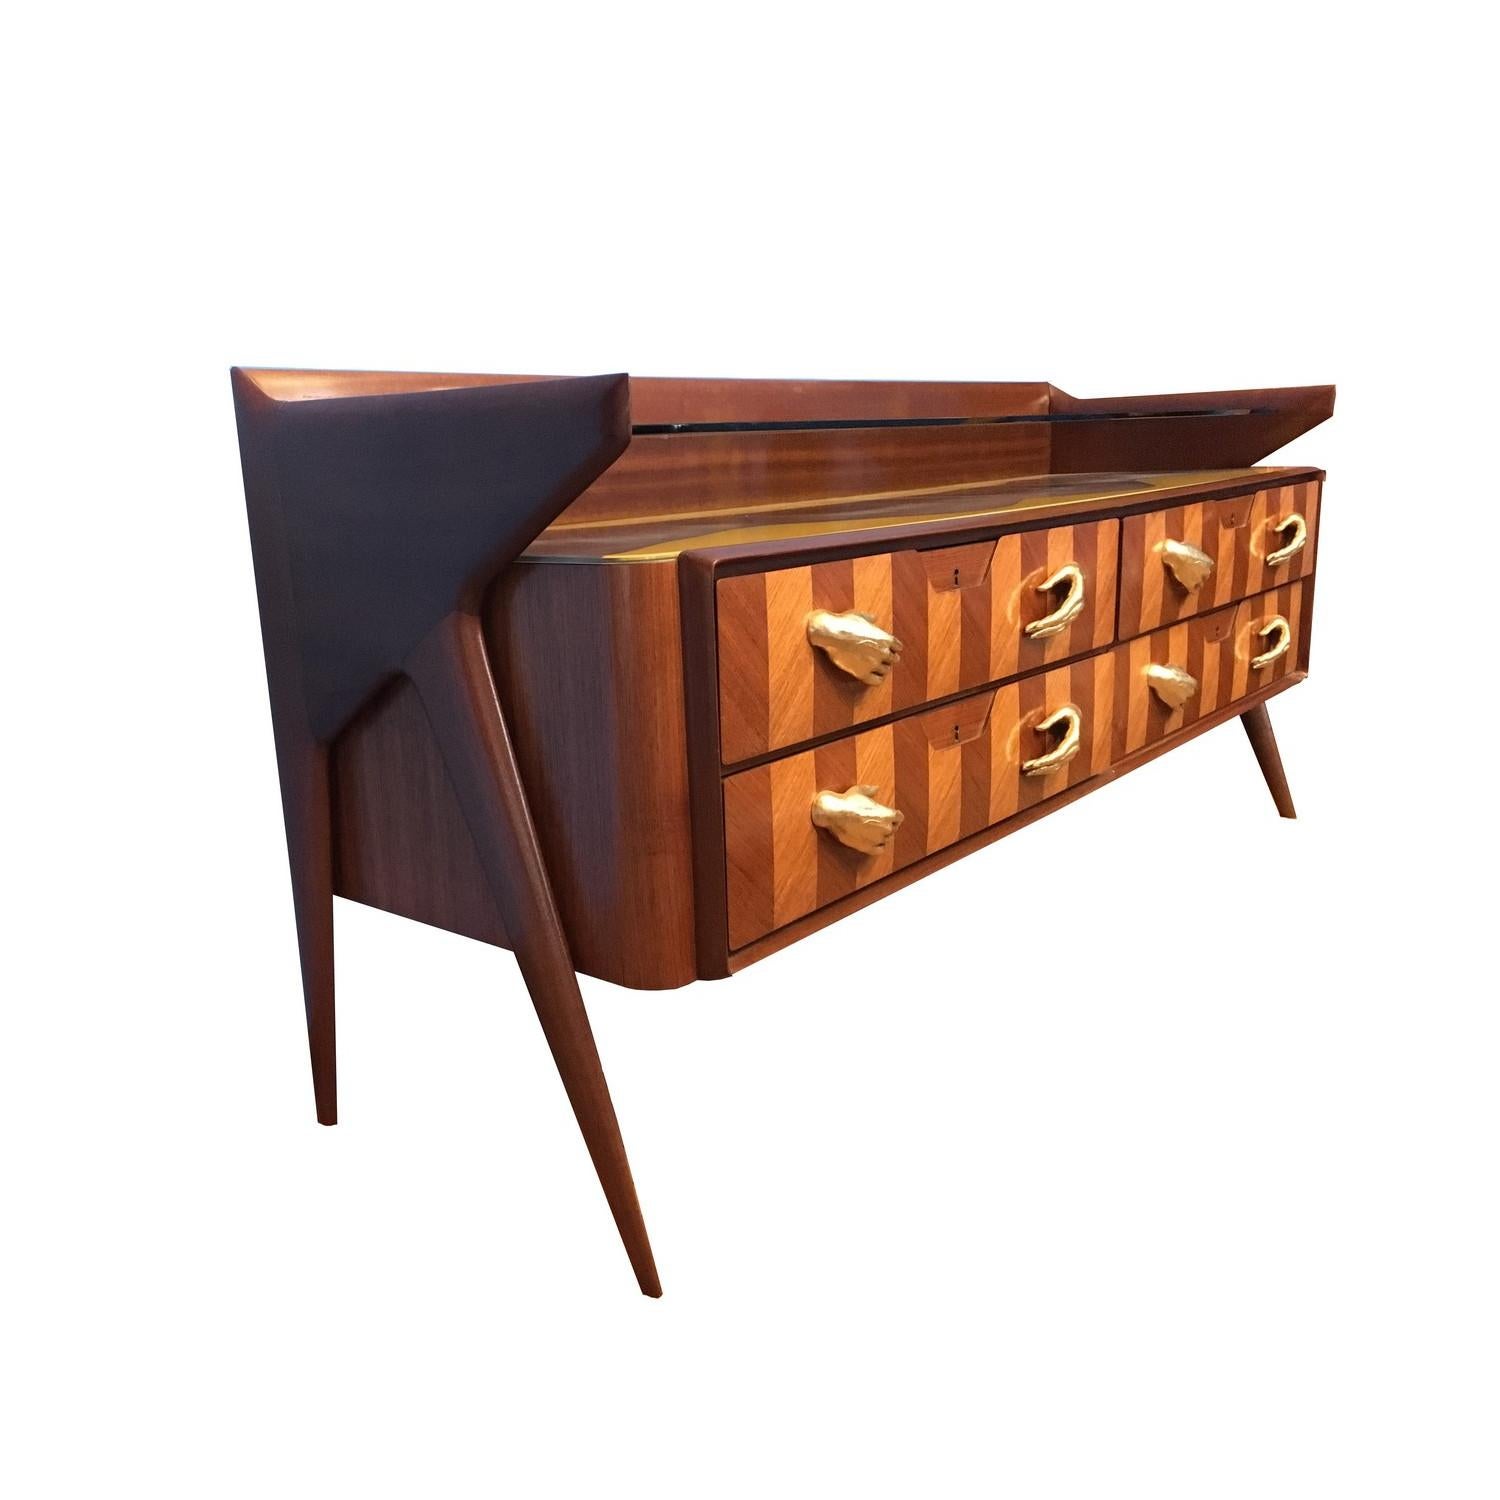 Modern Contemporary Sideboard with Hand-Like Handles and Female Nude Graphic For Sale